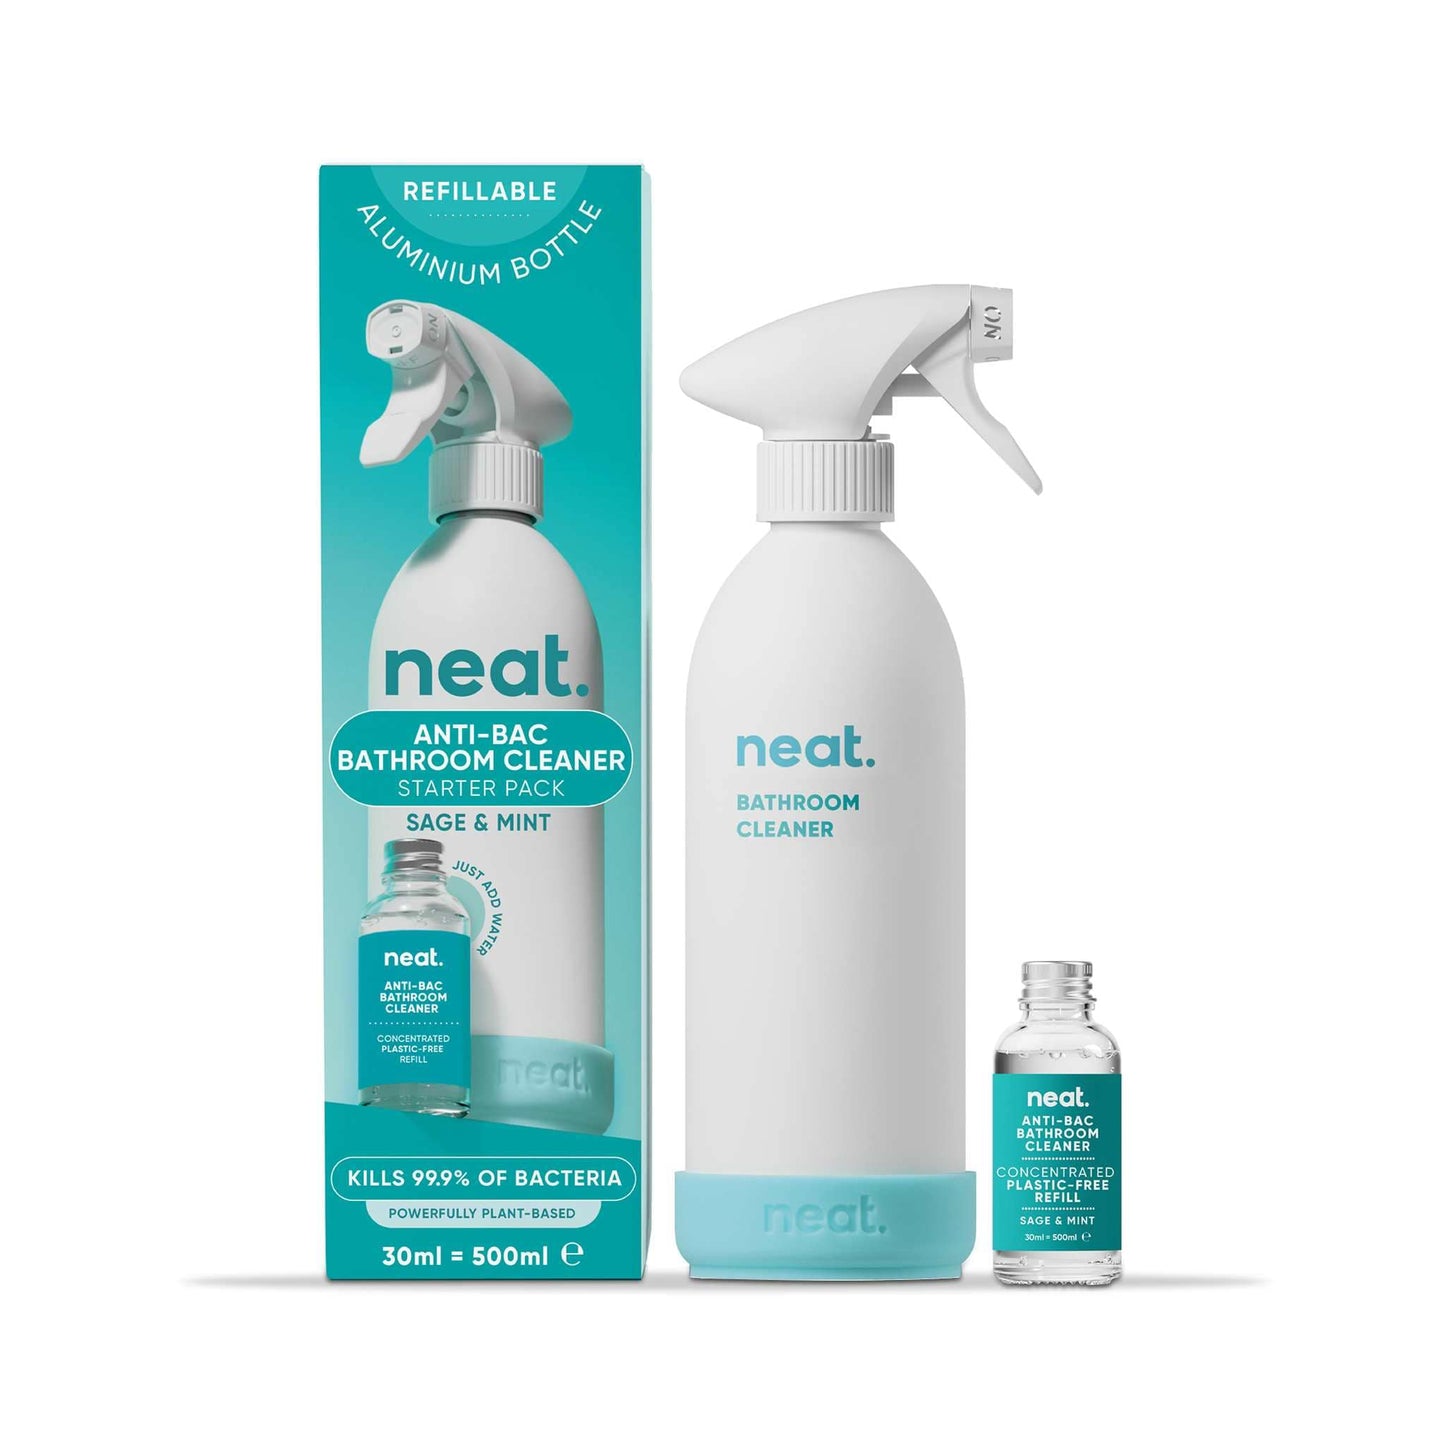 neat. Cleaning Detergents neat - Anti-Bac Bathroom Cleaner Refill Starter Pack - Sage & Mint 500ml